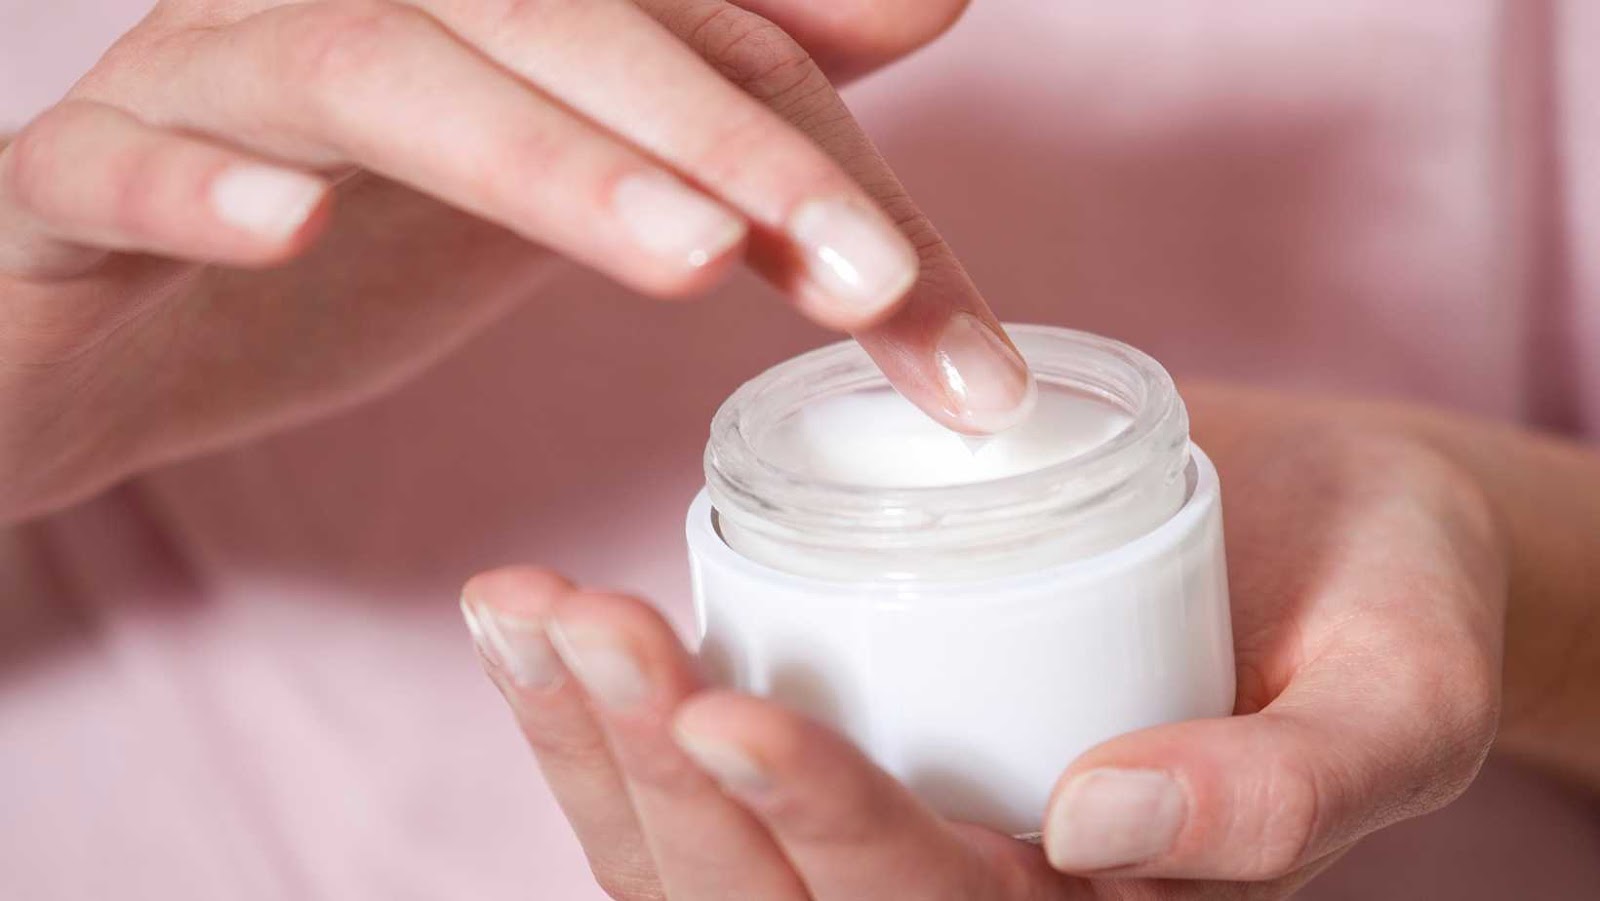 Are There Any Risks Associated With Using Face Moisturizer as Lube?